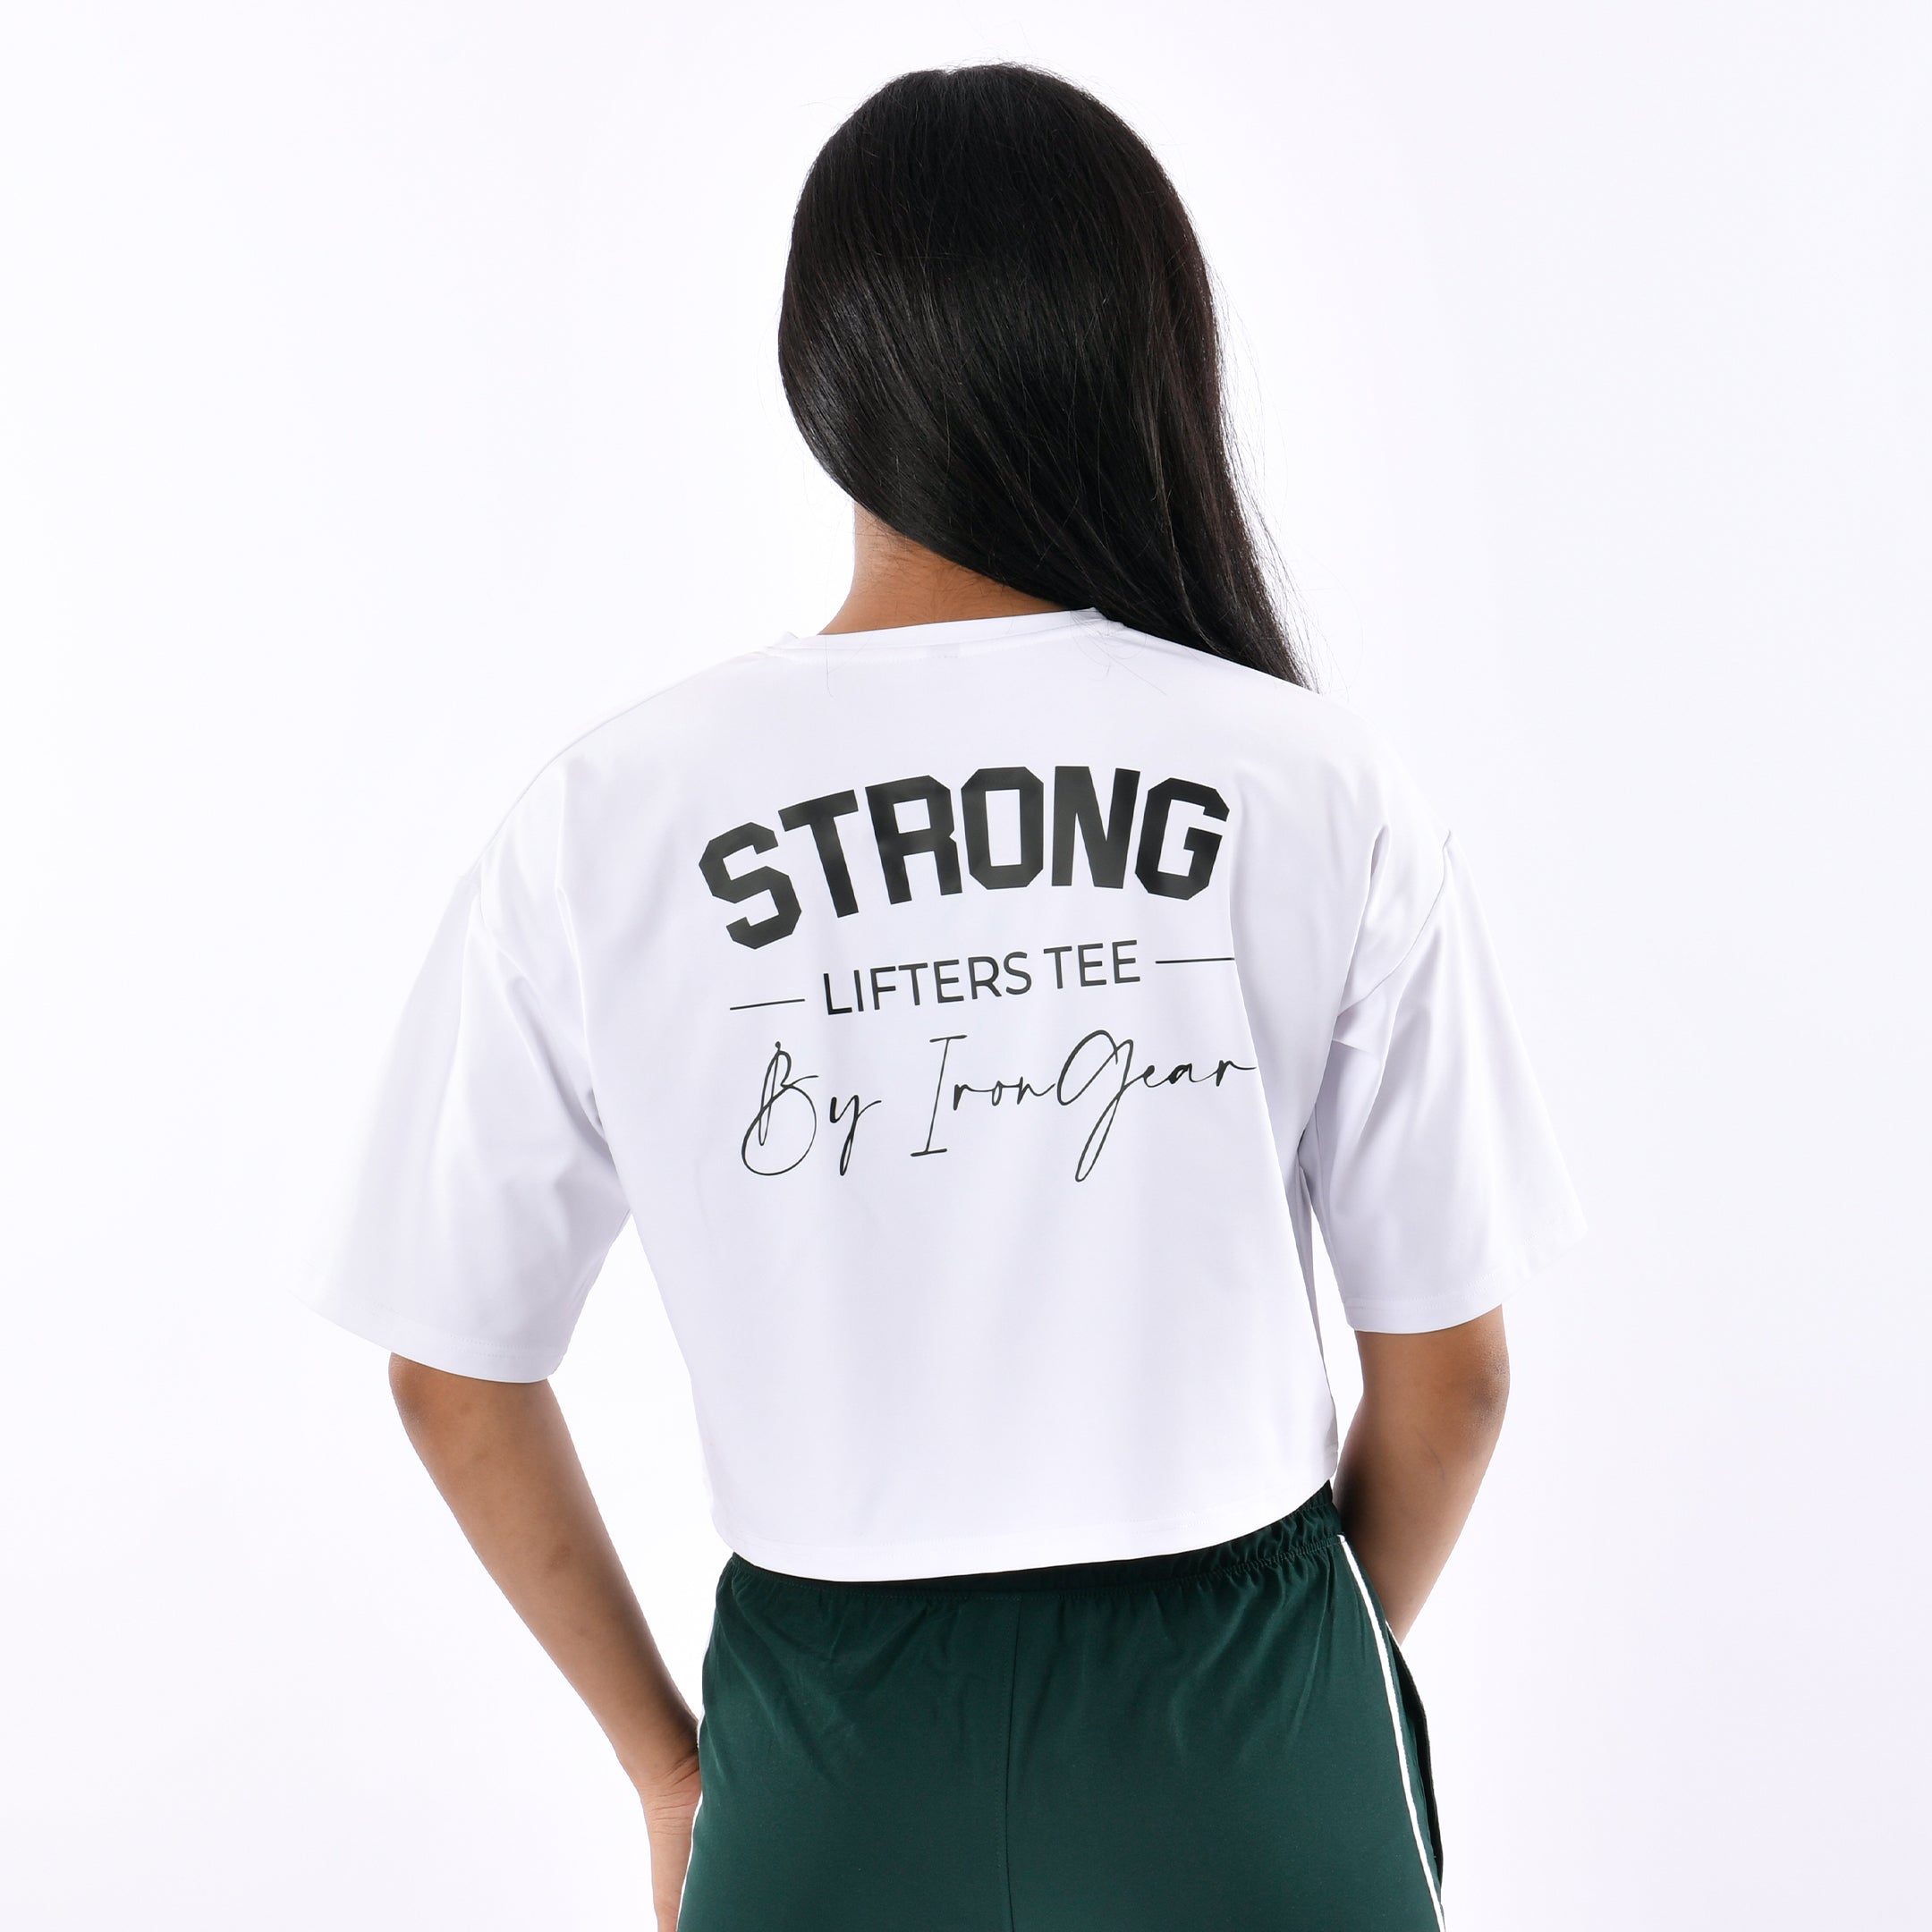 Lifters cropped tee